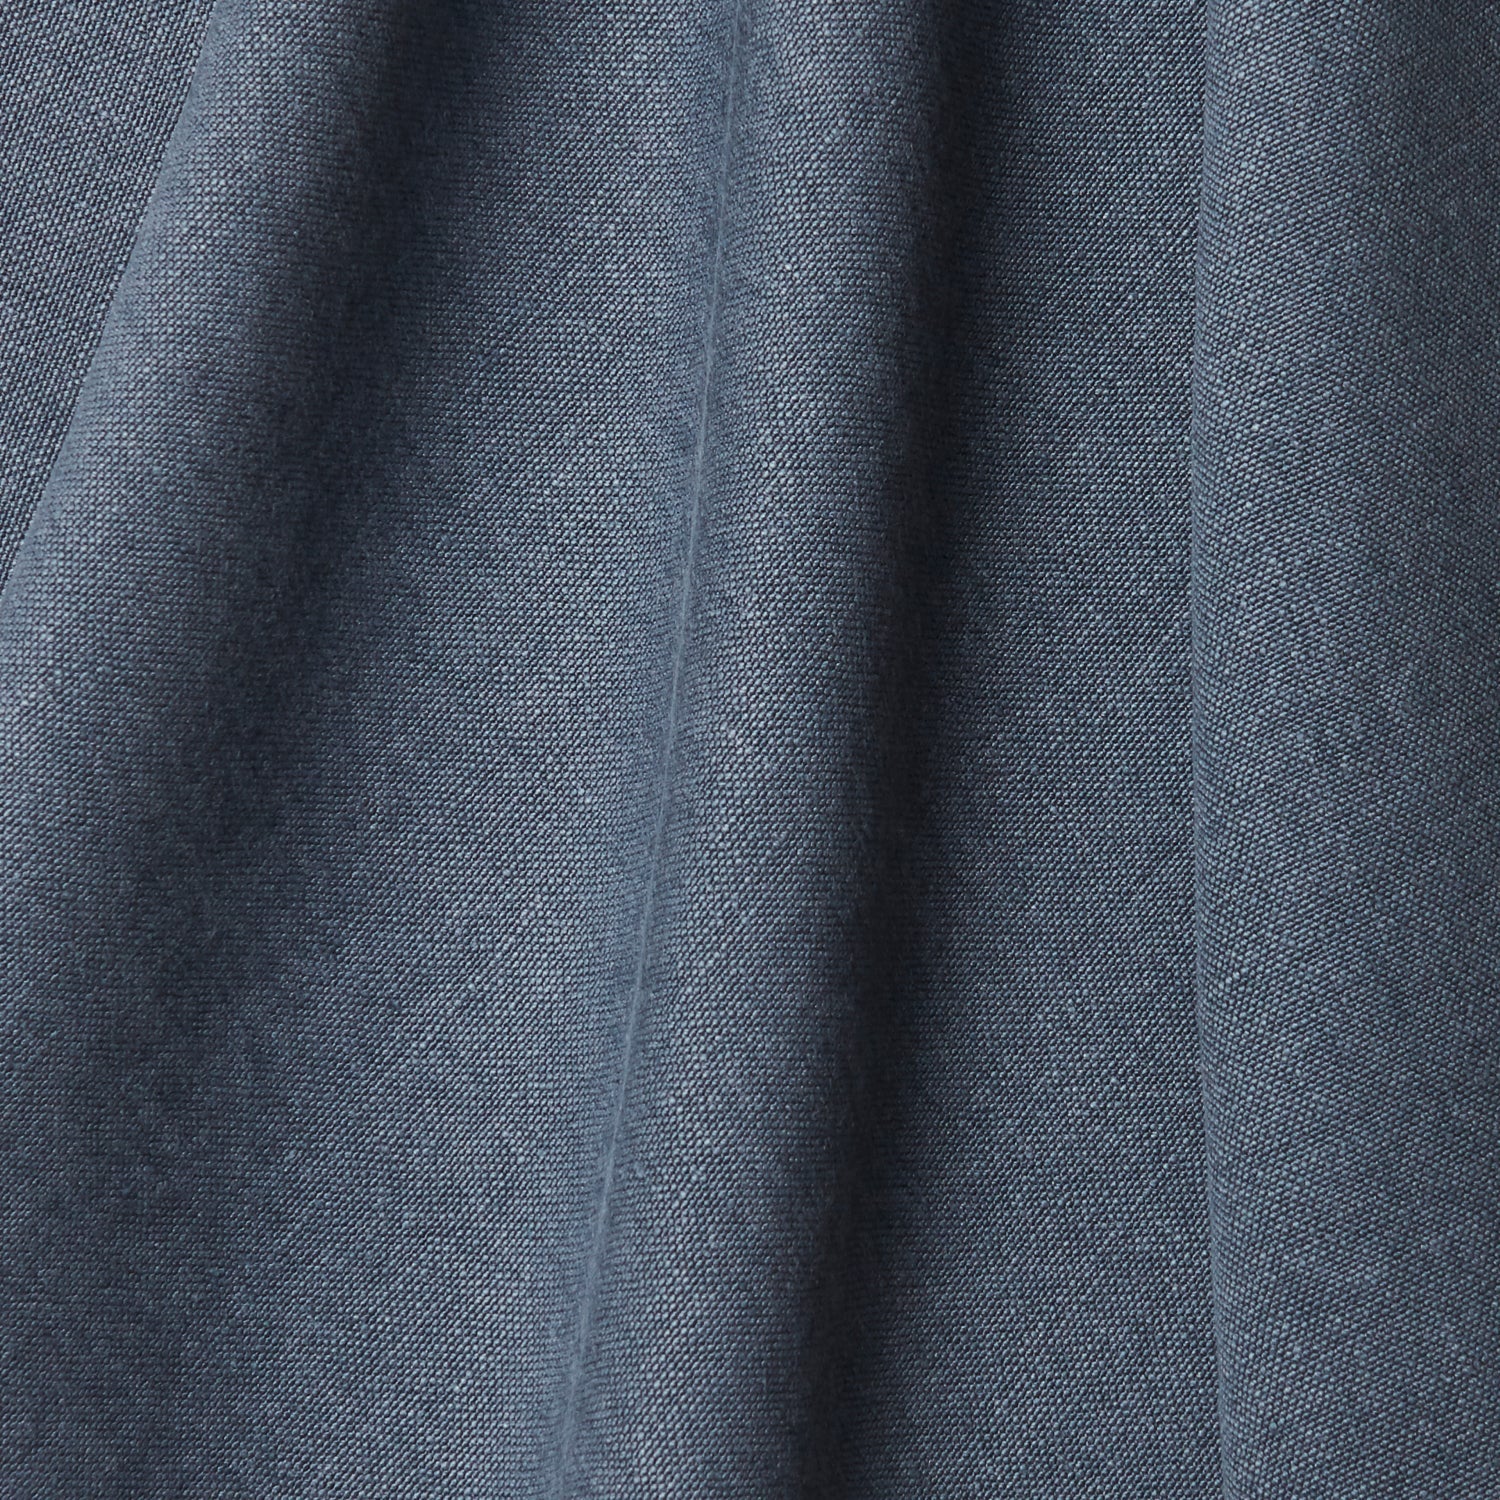 A draped swatch of linen fabric in a solid navy color.